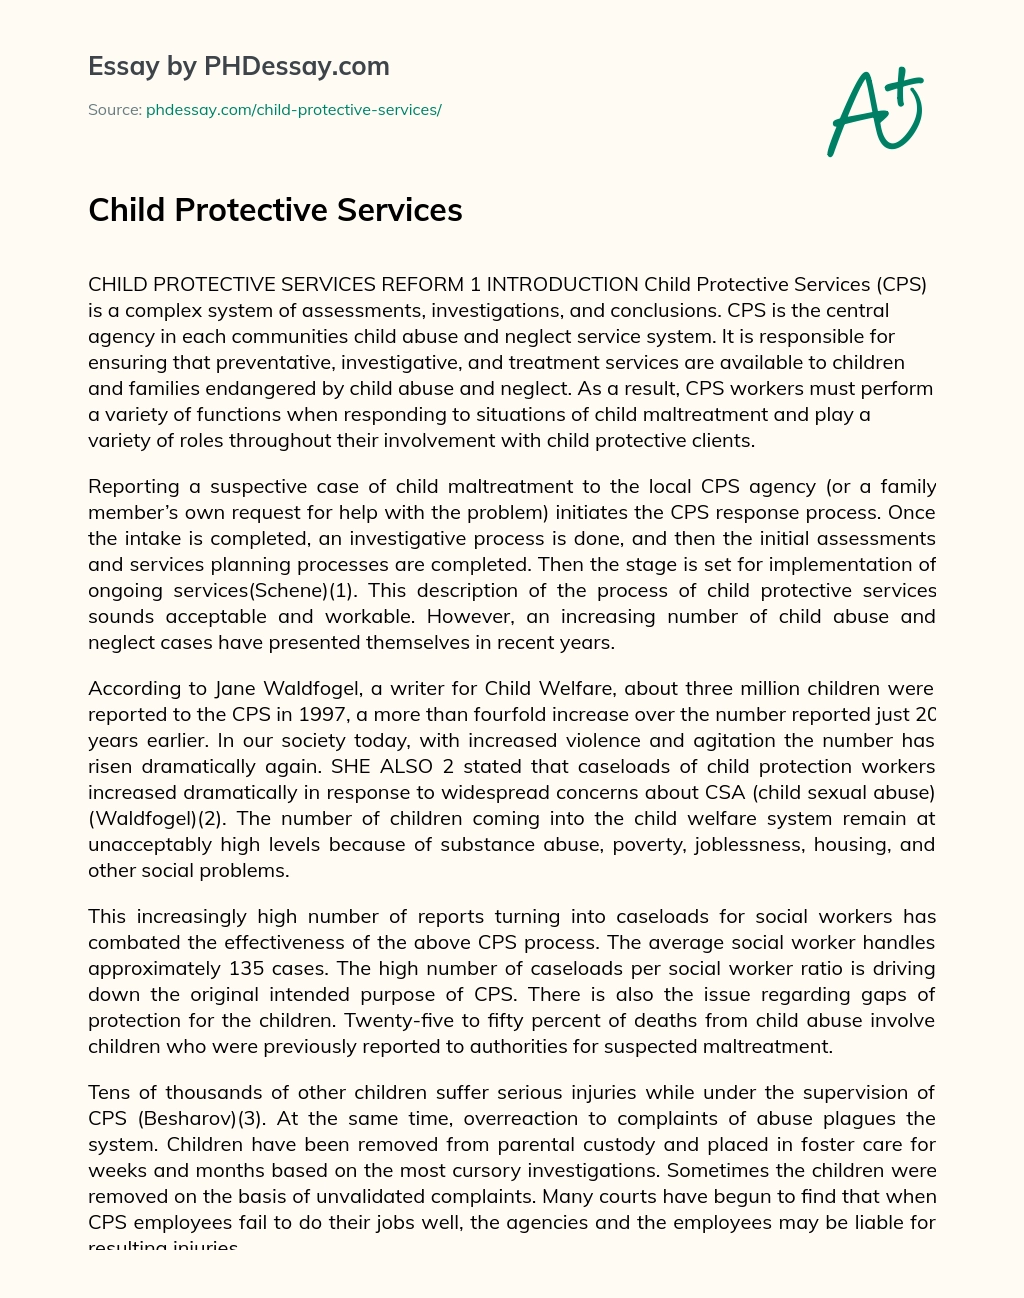 Child Protective Services essay